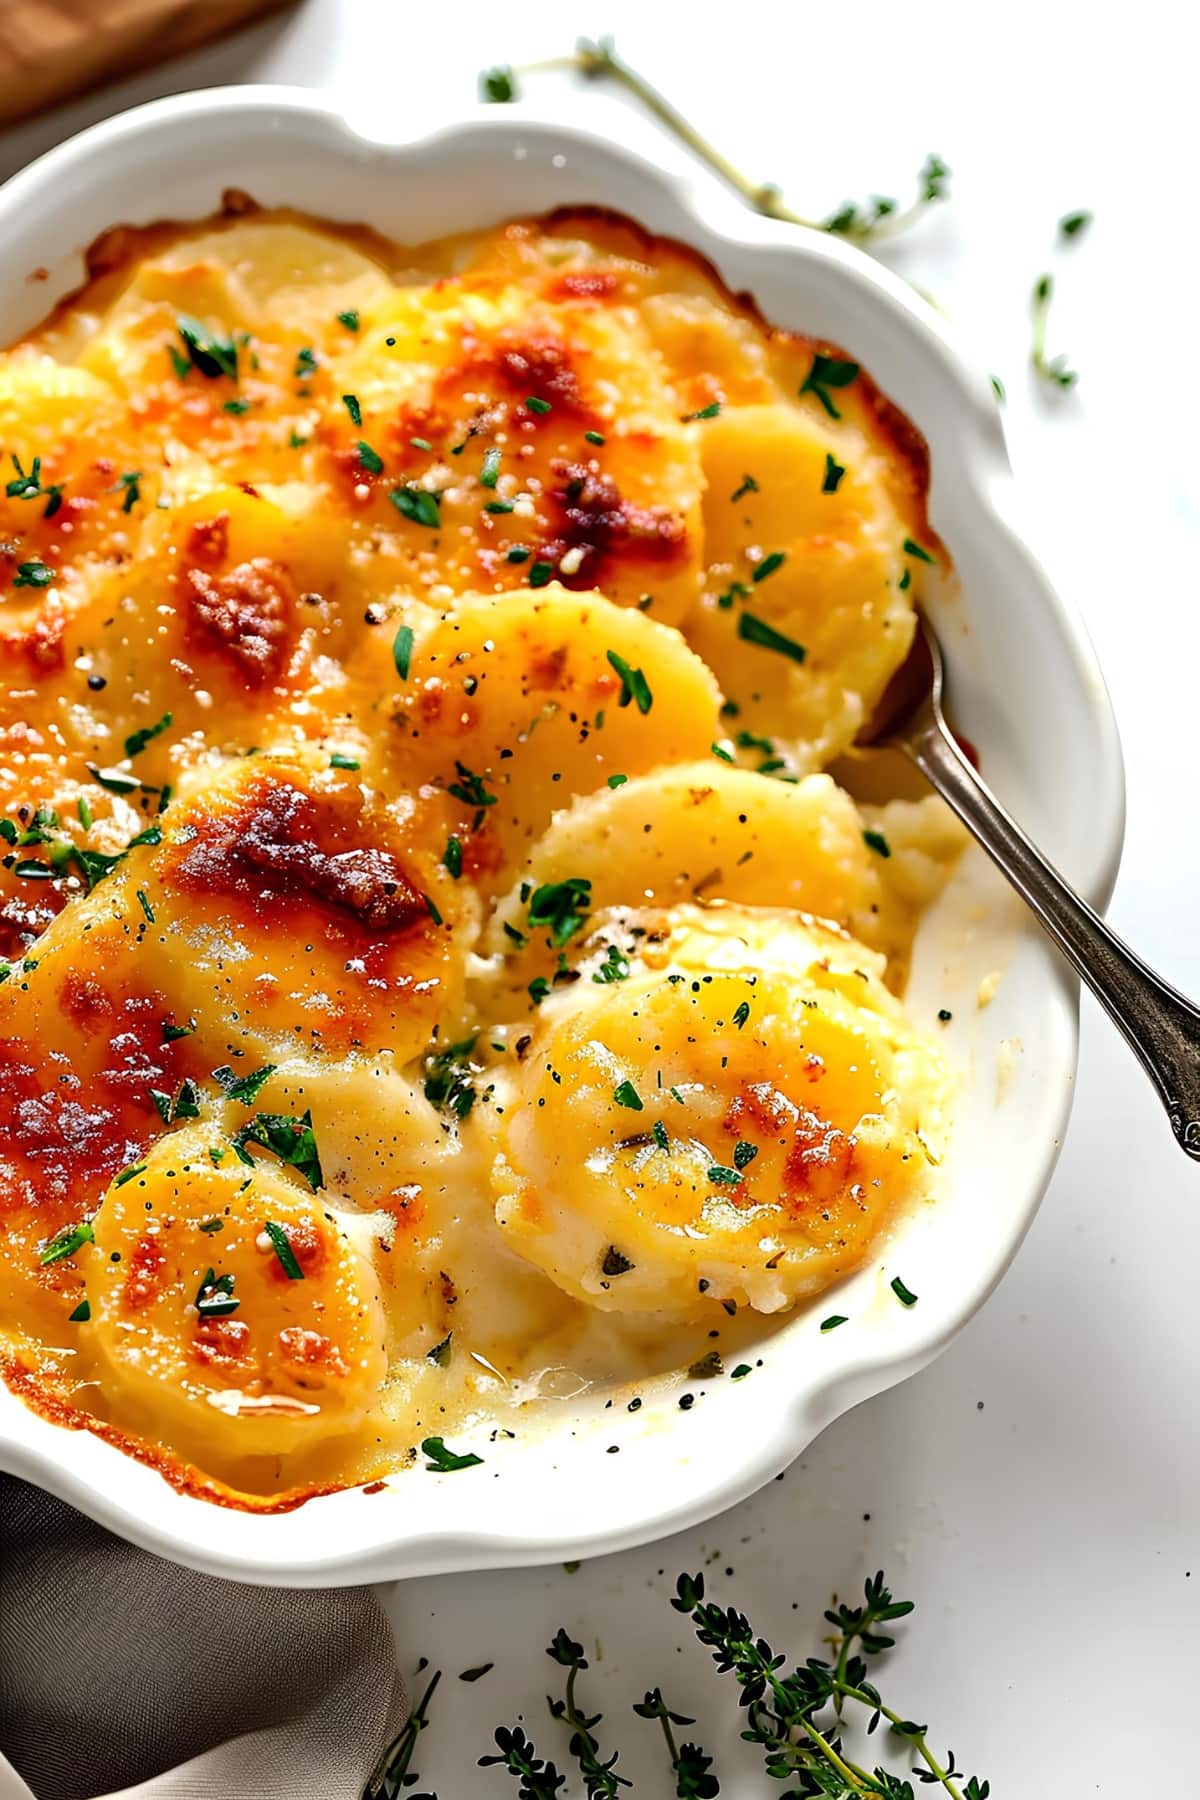 Creamy scalloped potatoes with herbs in a white plate